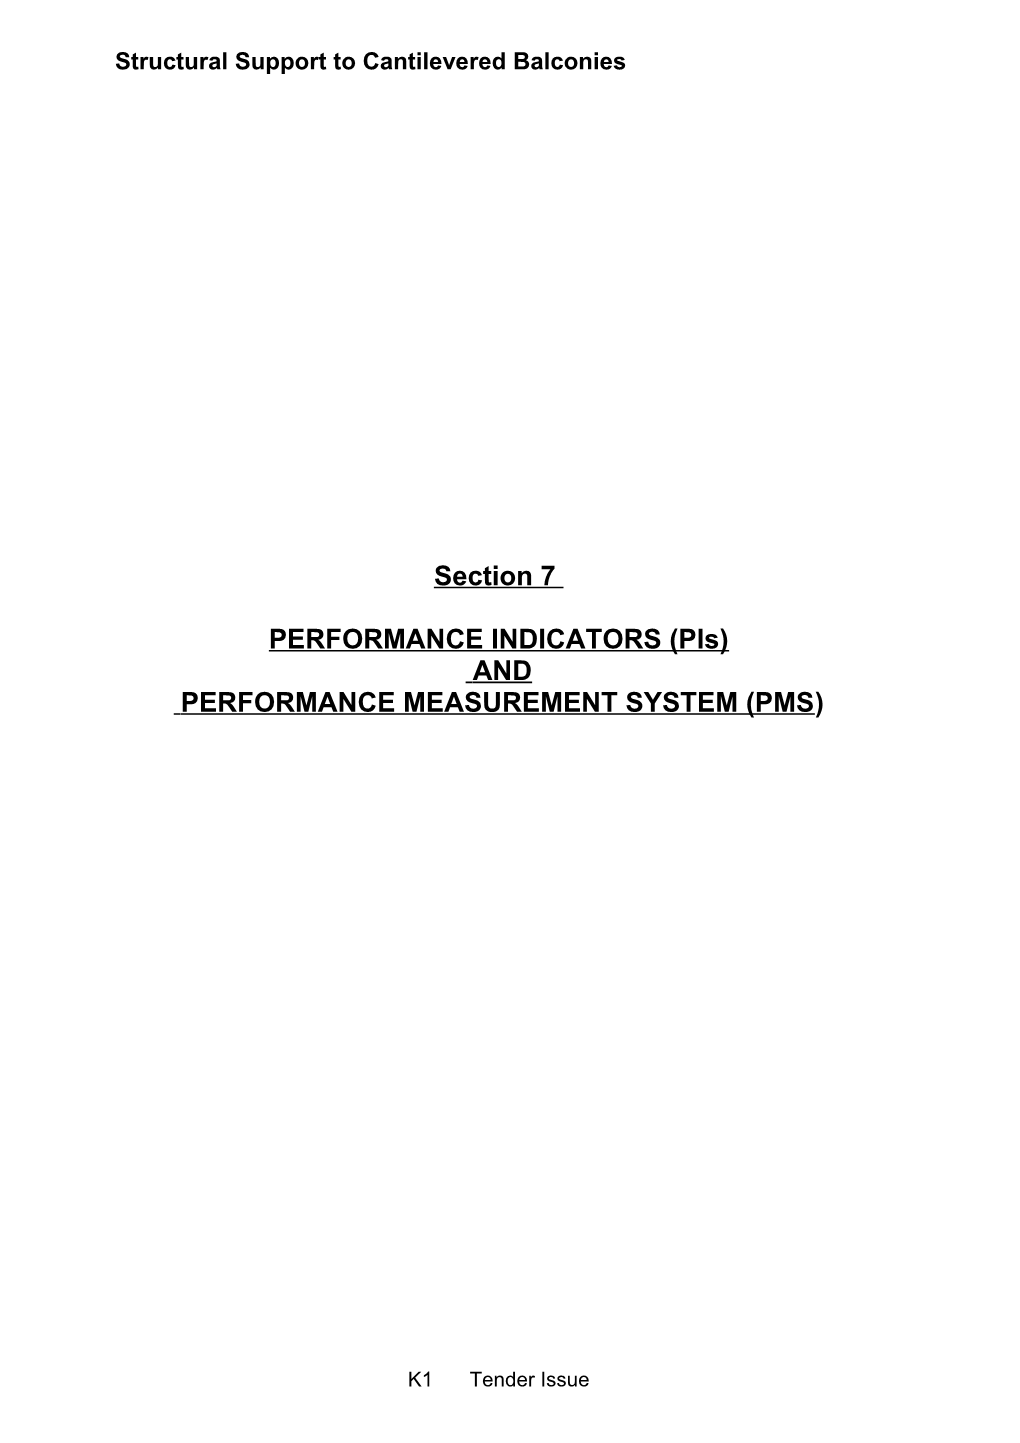 Section 7 Kpis and Performance Measurement System